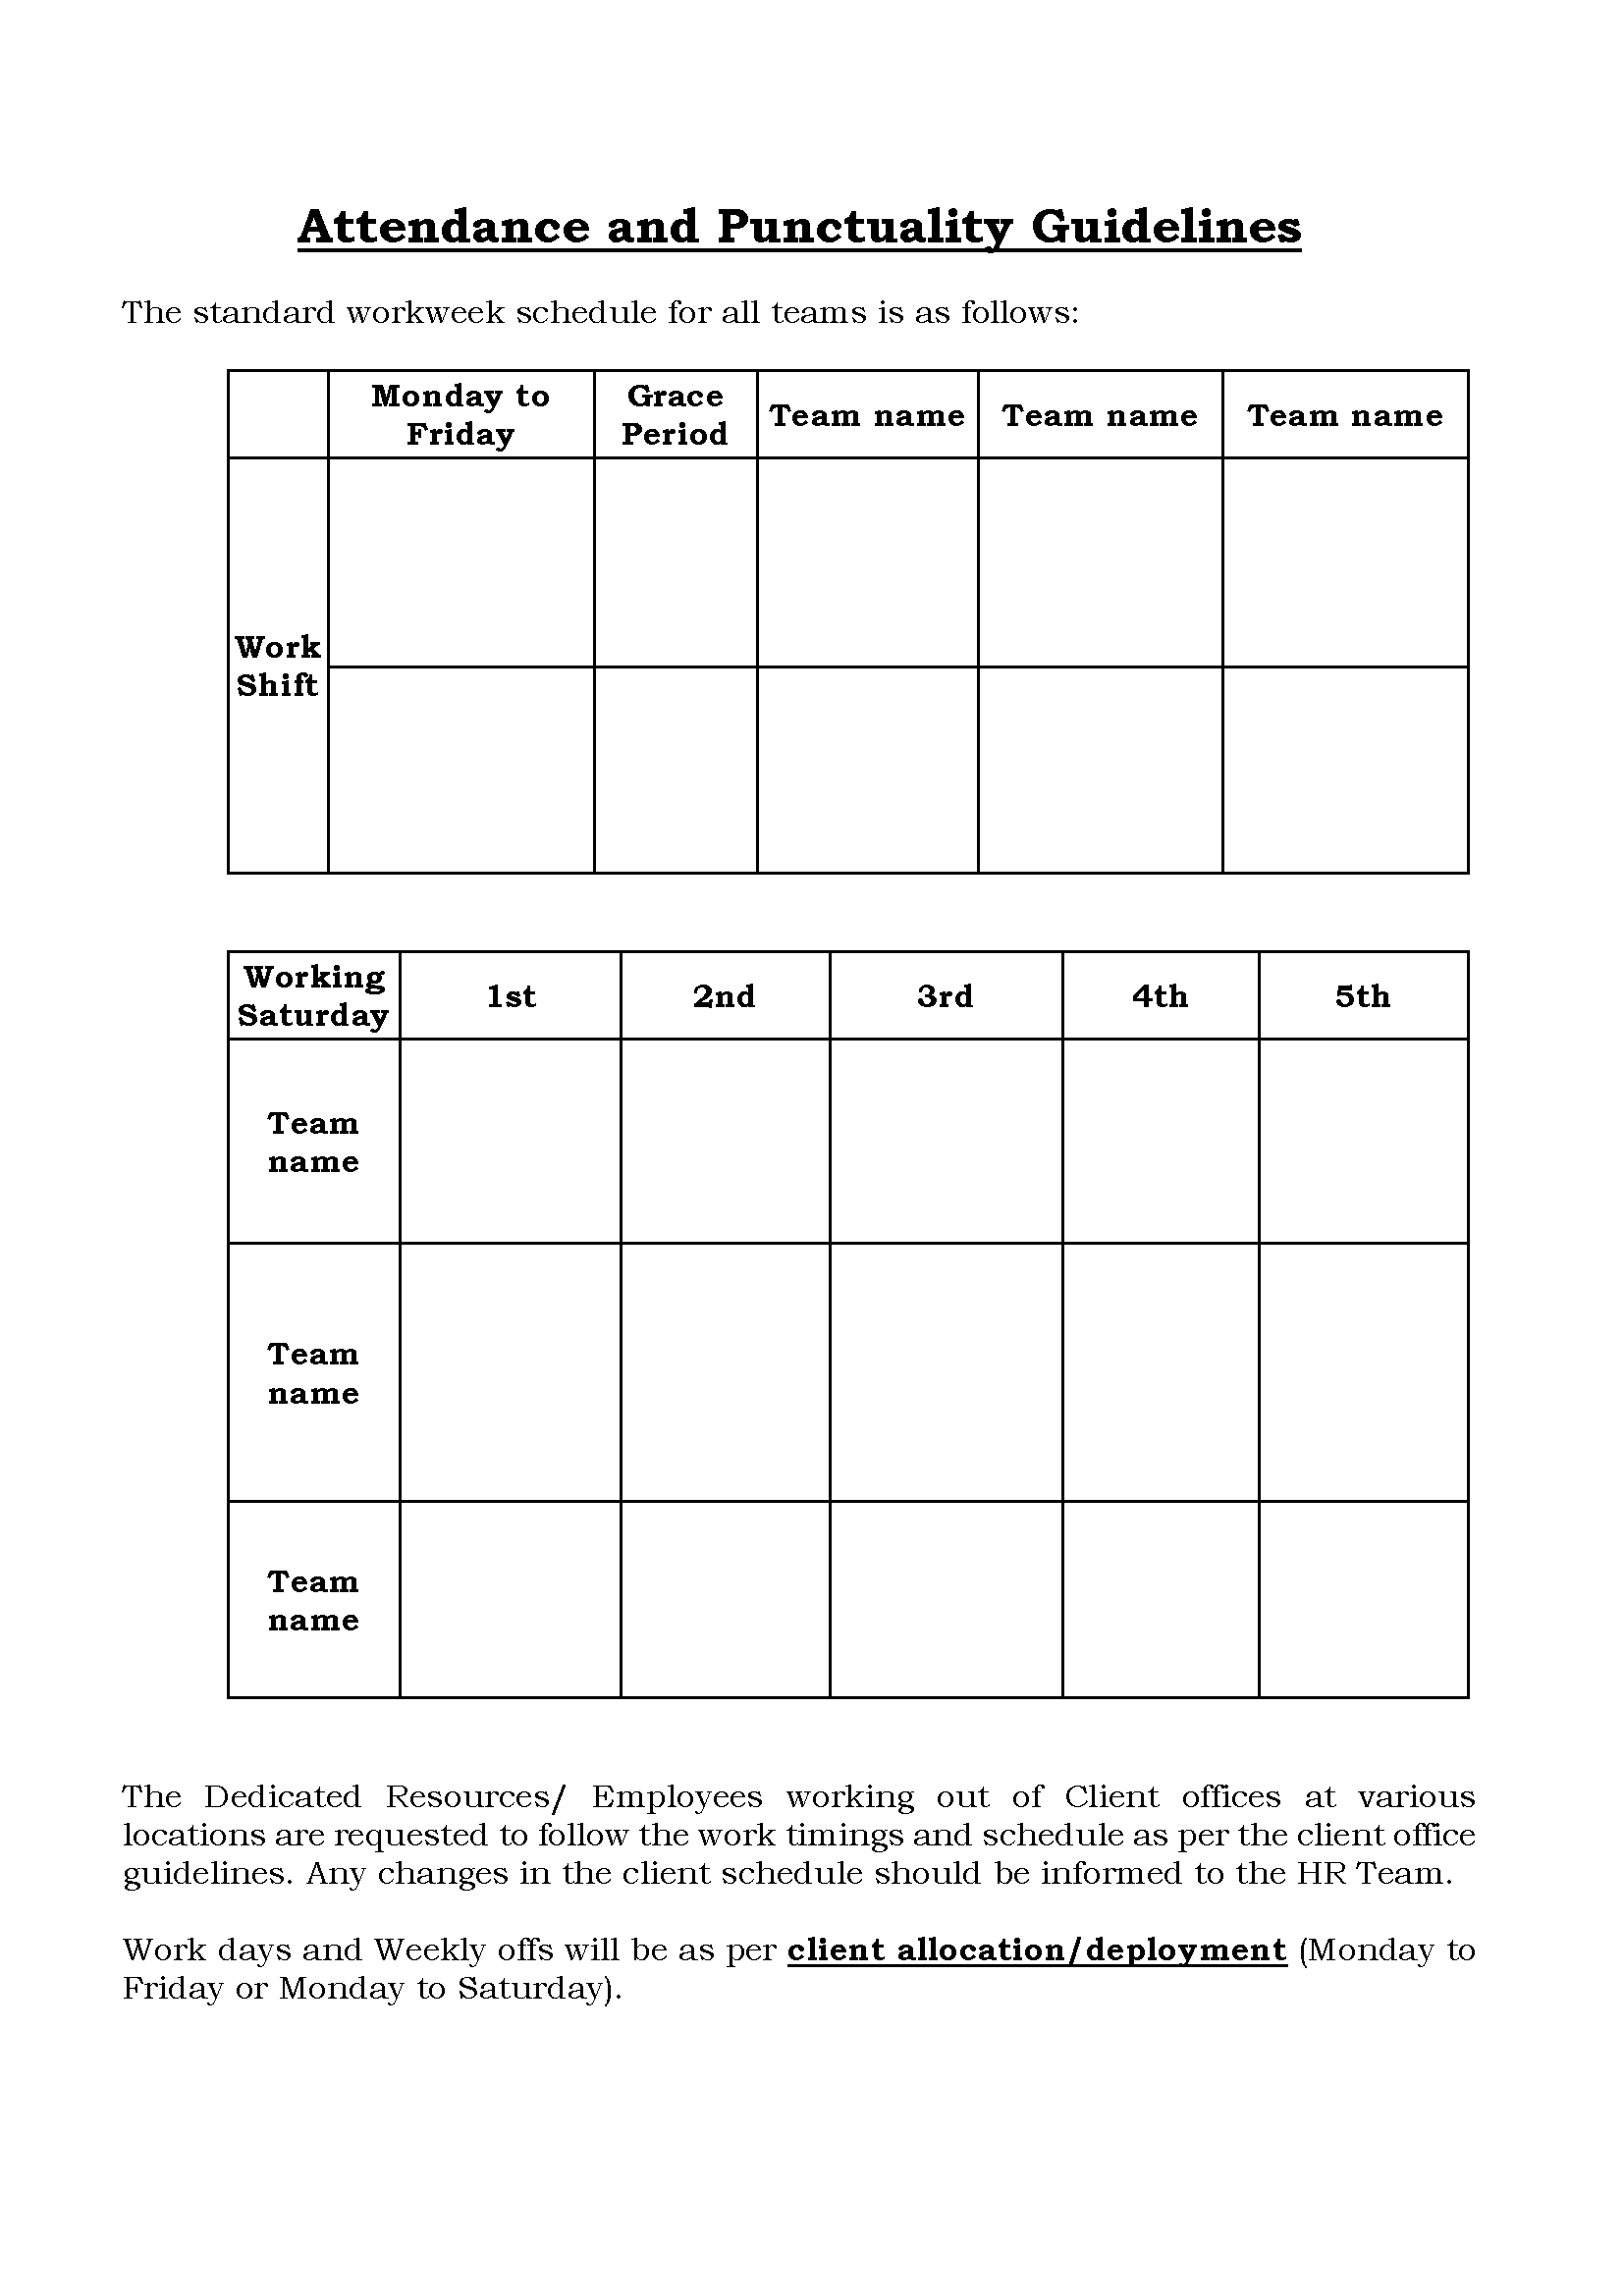 3 - Attendance And Punctuality Guidlines